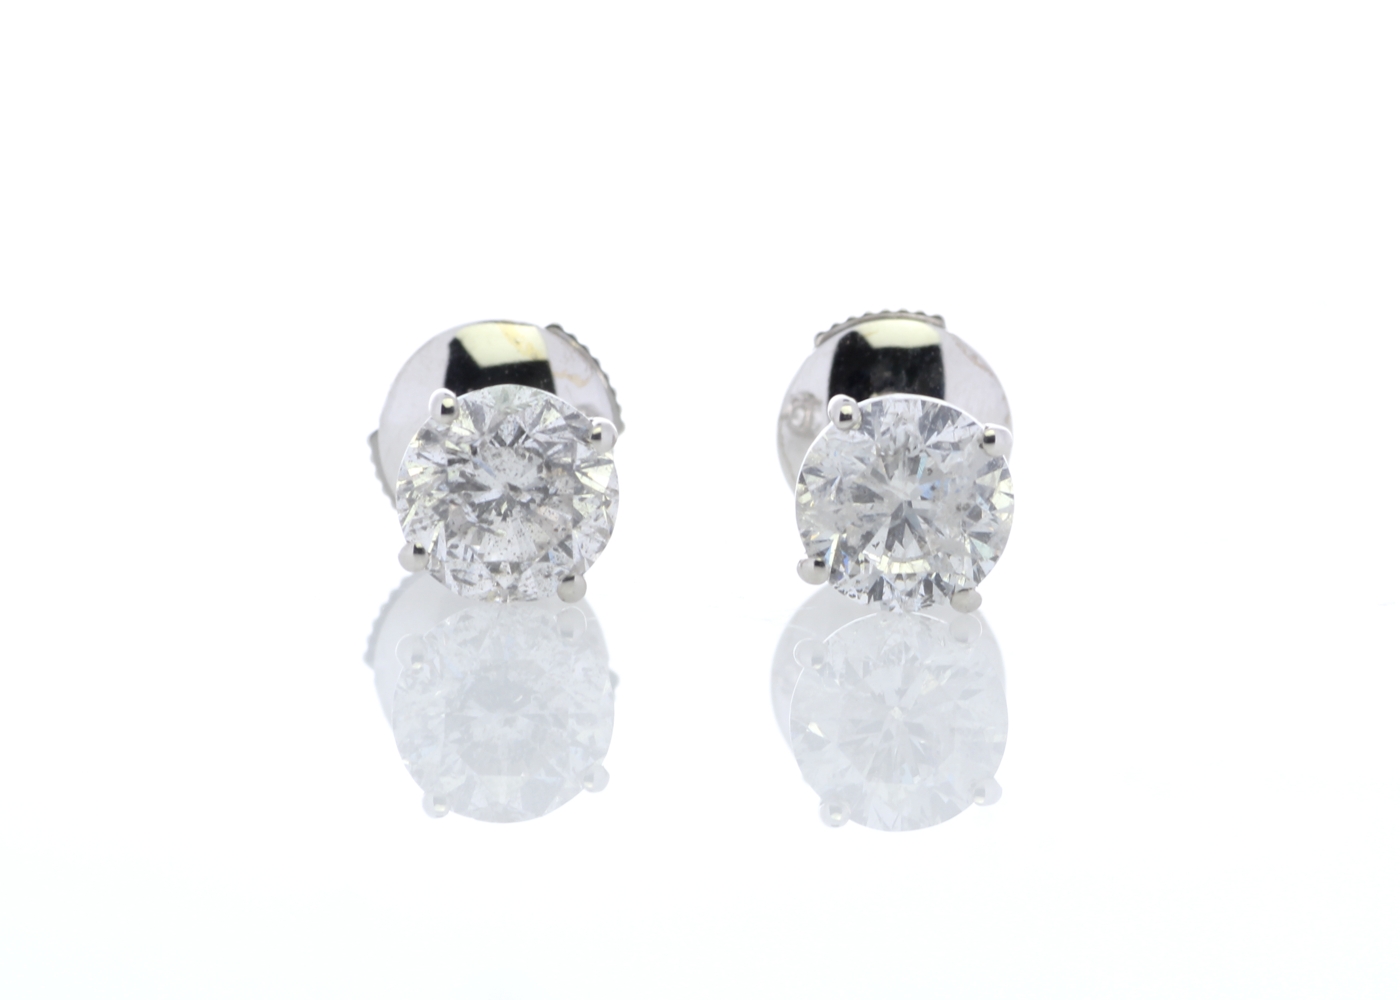 18ct White Gold Claw Set Diamond Earrings 2.21 Carats